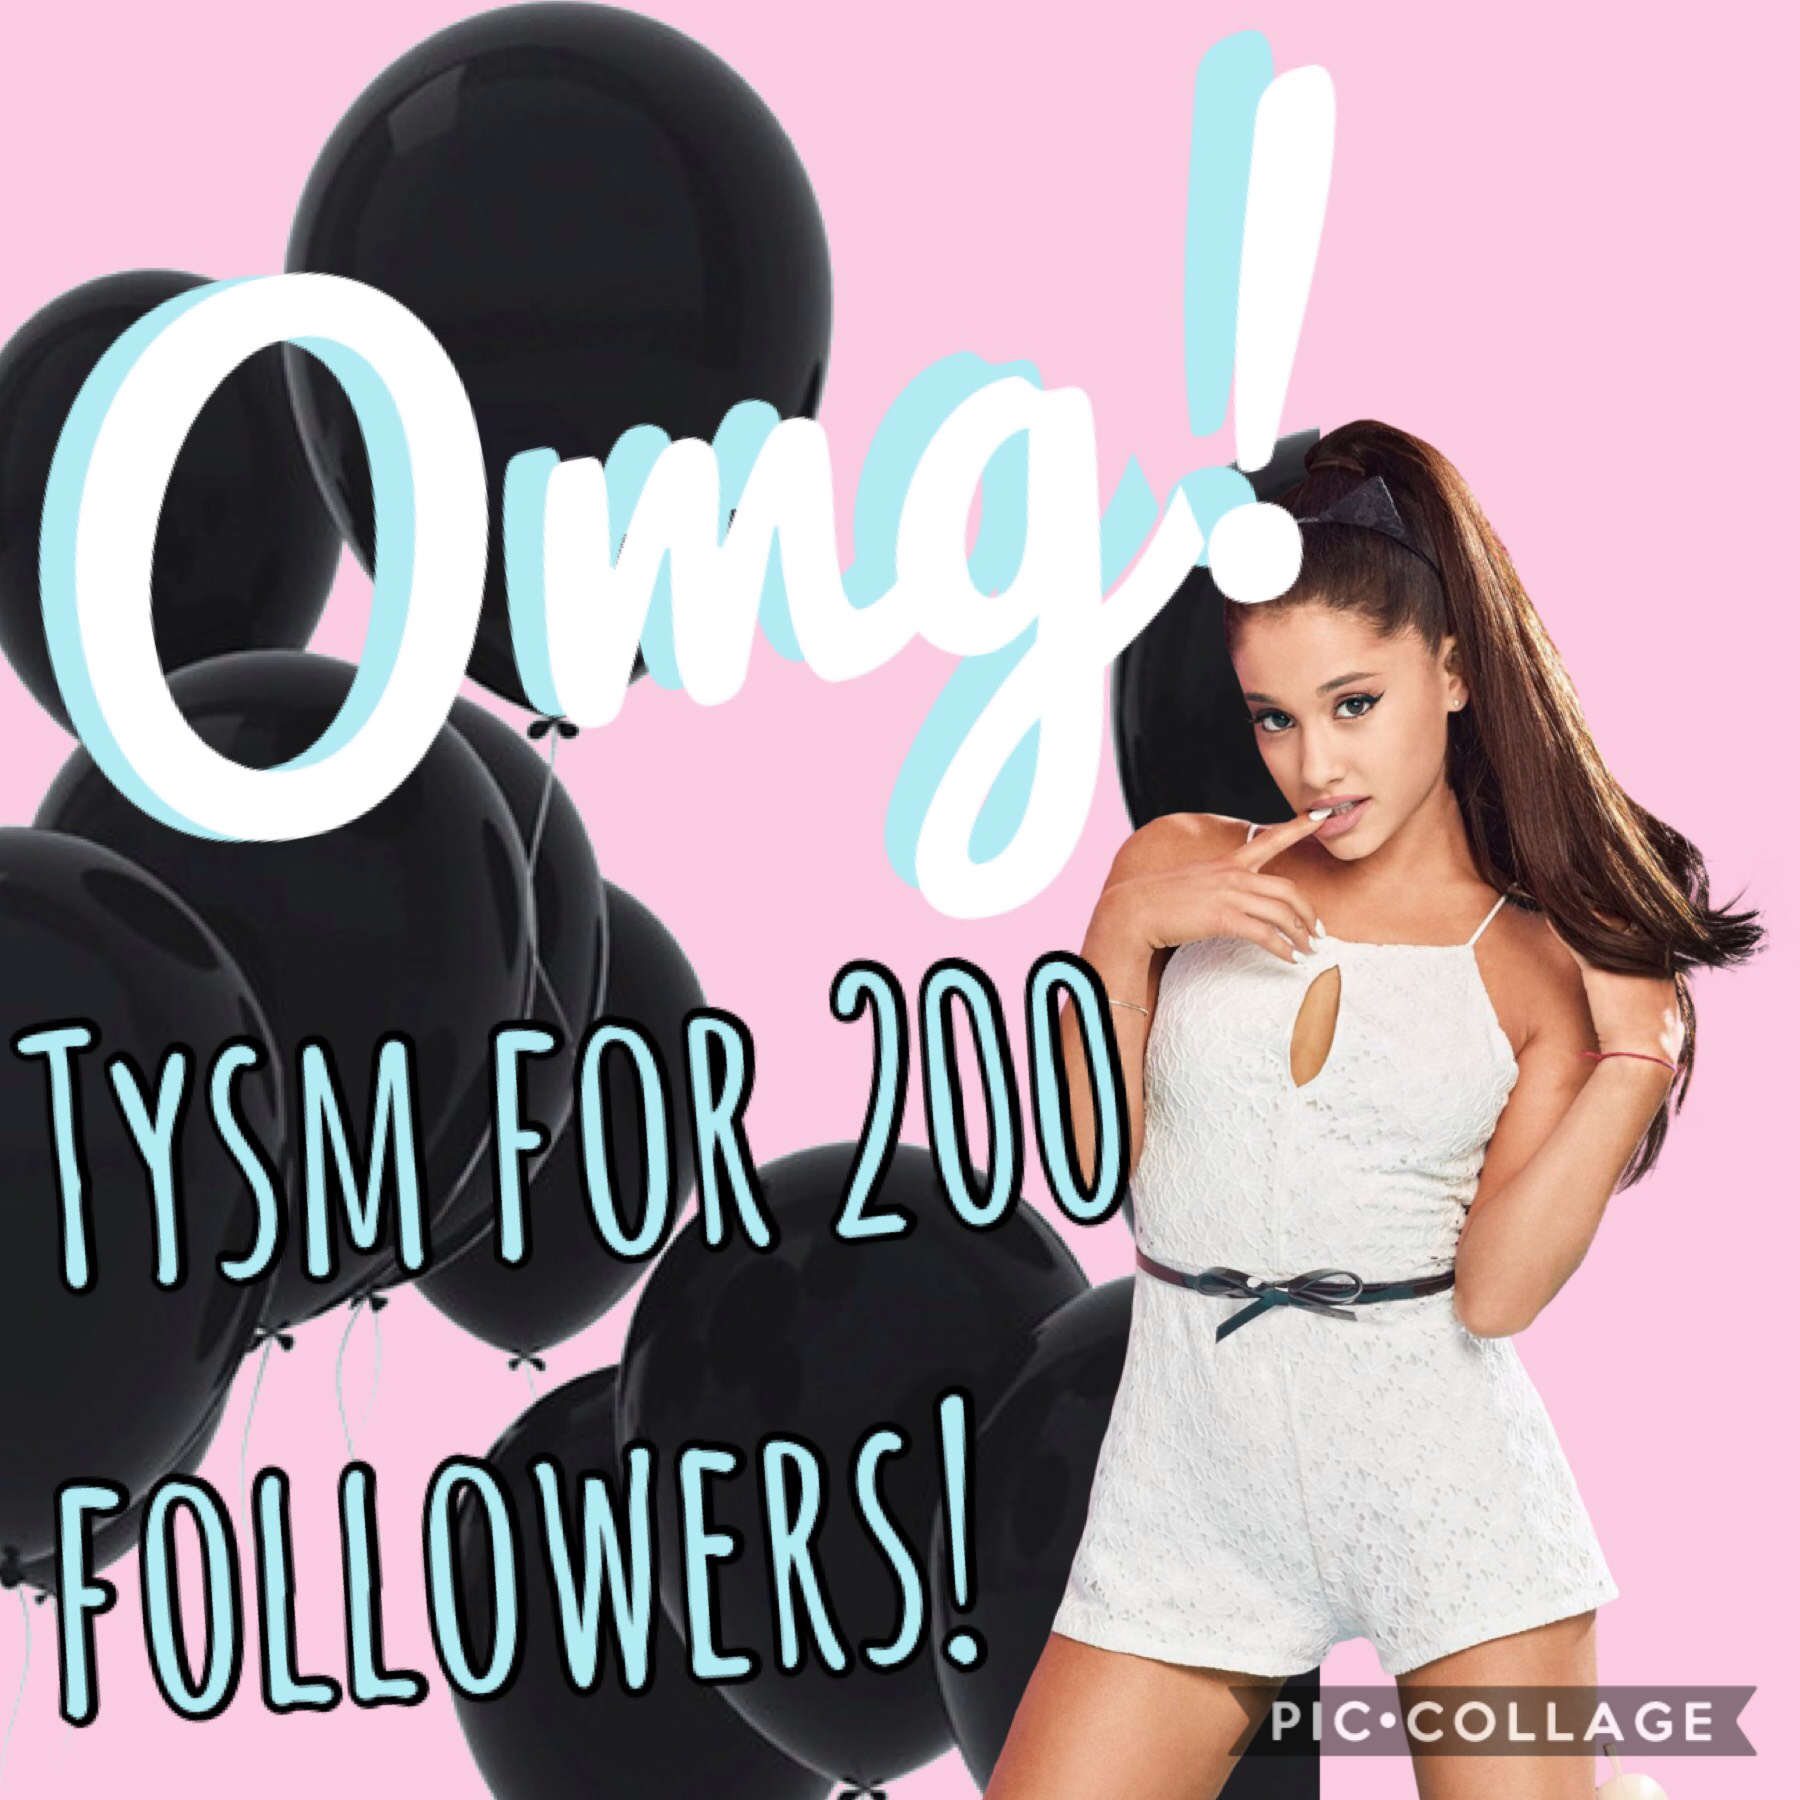 TYSM!!!!!! This means the world to me! ❤️❤️❤️❤️❤️❤️❤️❤️❤️❤️❤️❤️❤️❤️❤️❤️❤️❤️❤️❤️❤️❤️❤️❤️❤️❤️❤️❤️❤️❤️❤️❤️❤️❤️❤️❤️❤️❤️❤️❤️❤️❤️❤️❤️❤️❤️❤️❤️❤️❤️❤️❤️❤️❤️❤️❤️❤️❤️❤️❤️❤️❤️❤️❤️❤️❤️❤️❤️❤️❤️❤️❤️❤️❤️❤️❤️❤️❤️❤️❤️❤️❤️❤️❤️❤️❤️